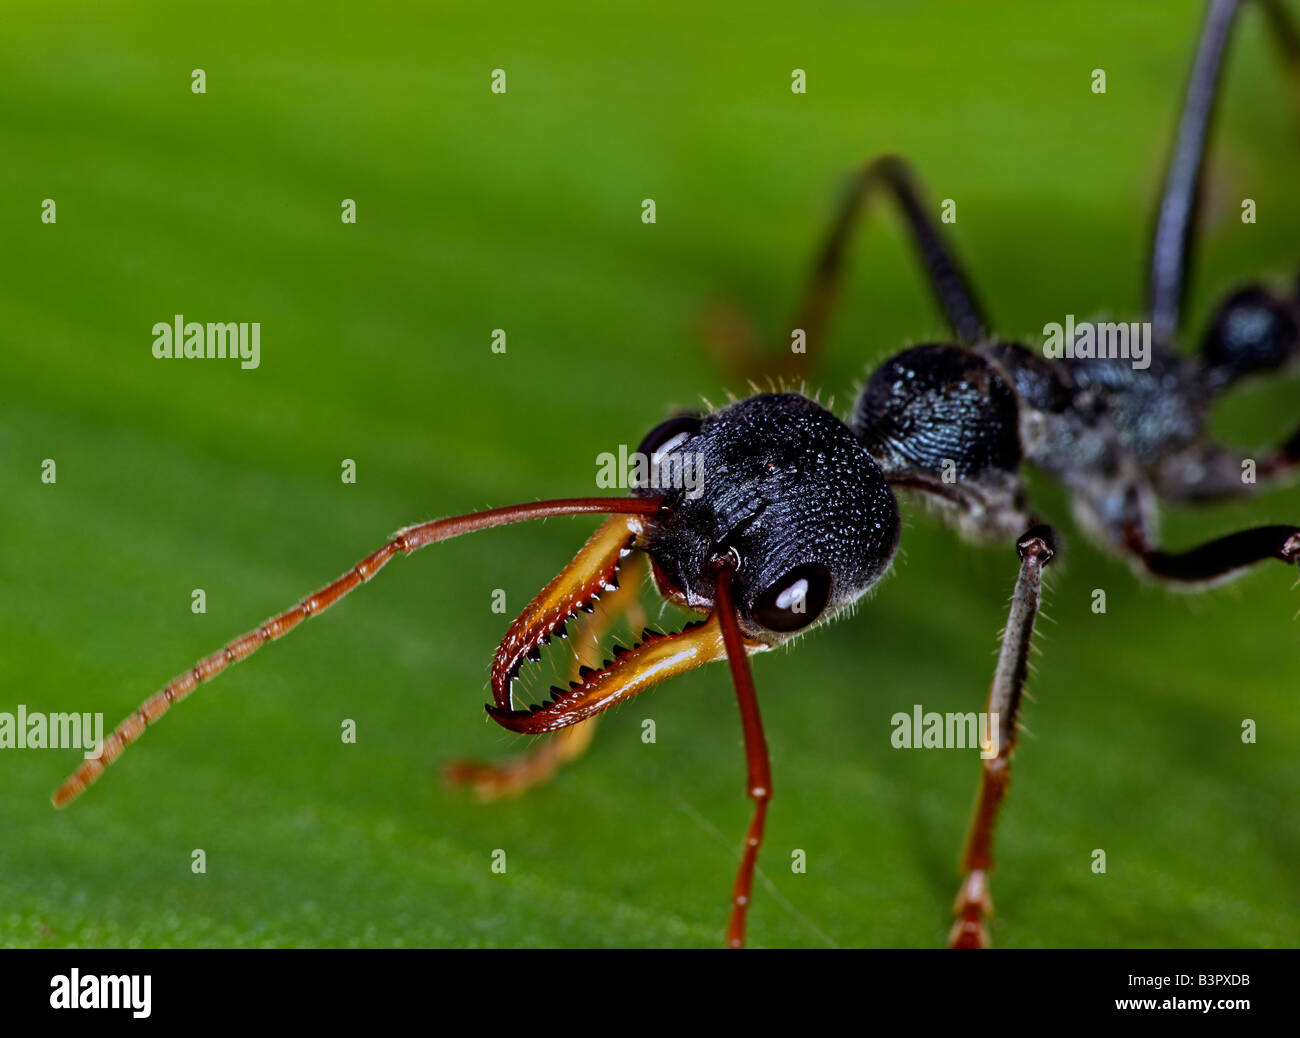 are bulldog ants the only australian ant species